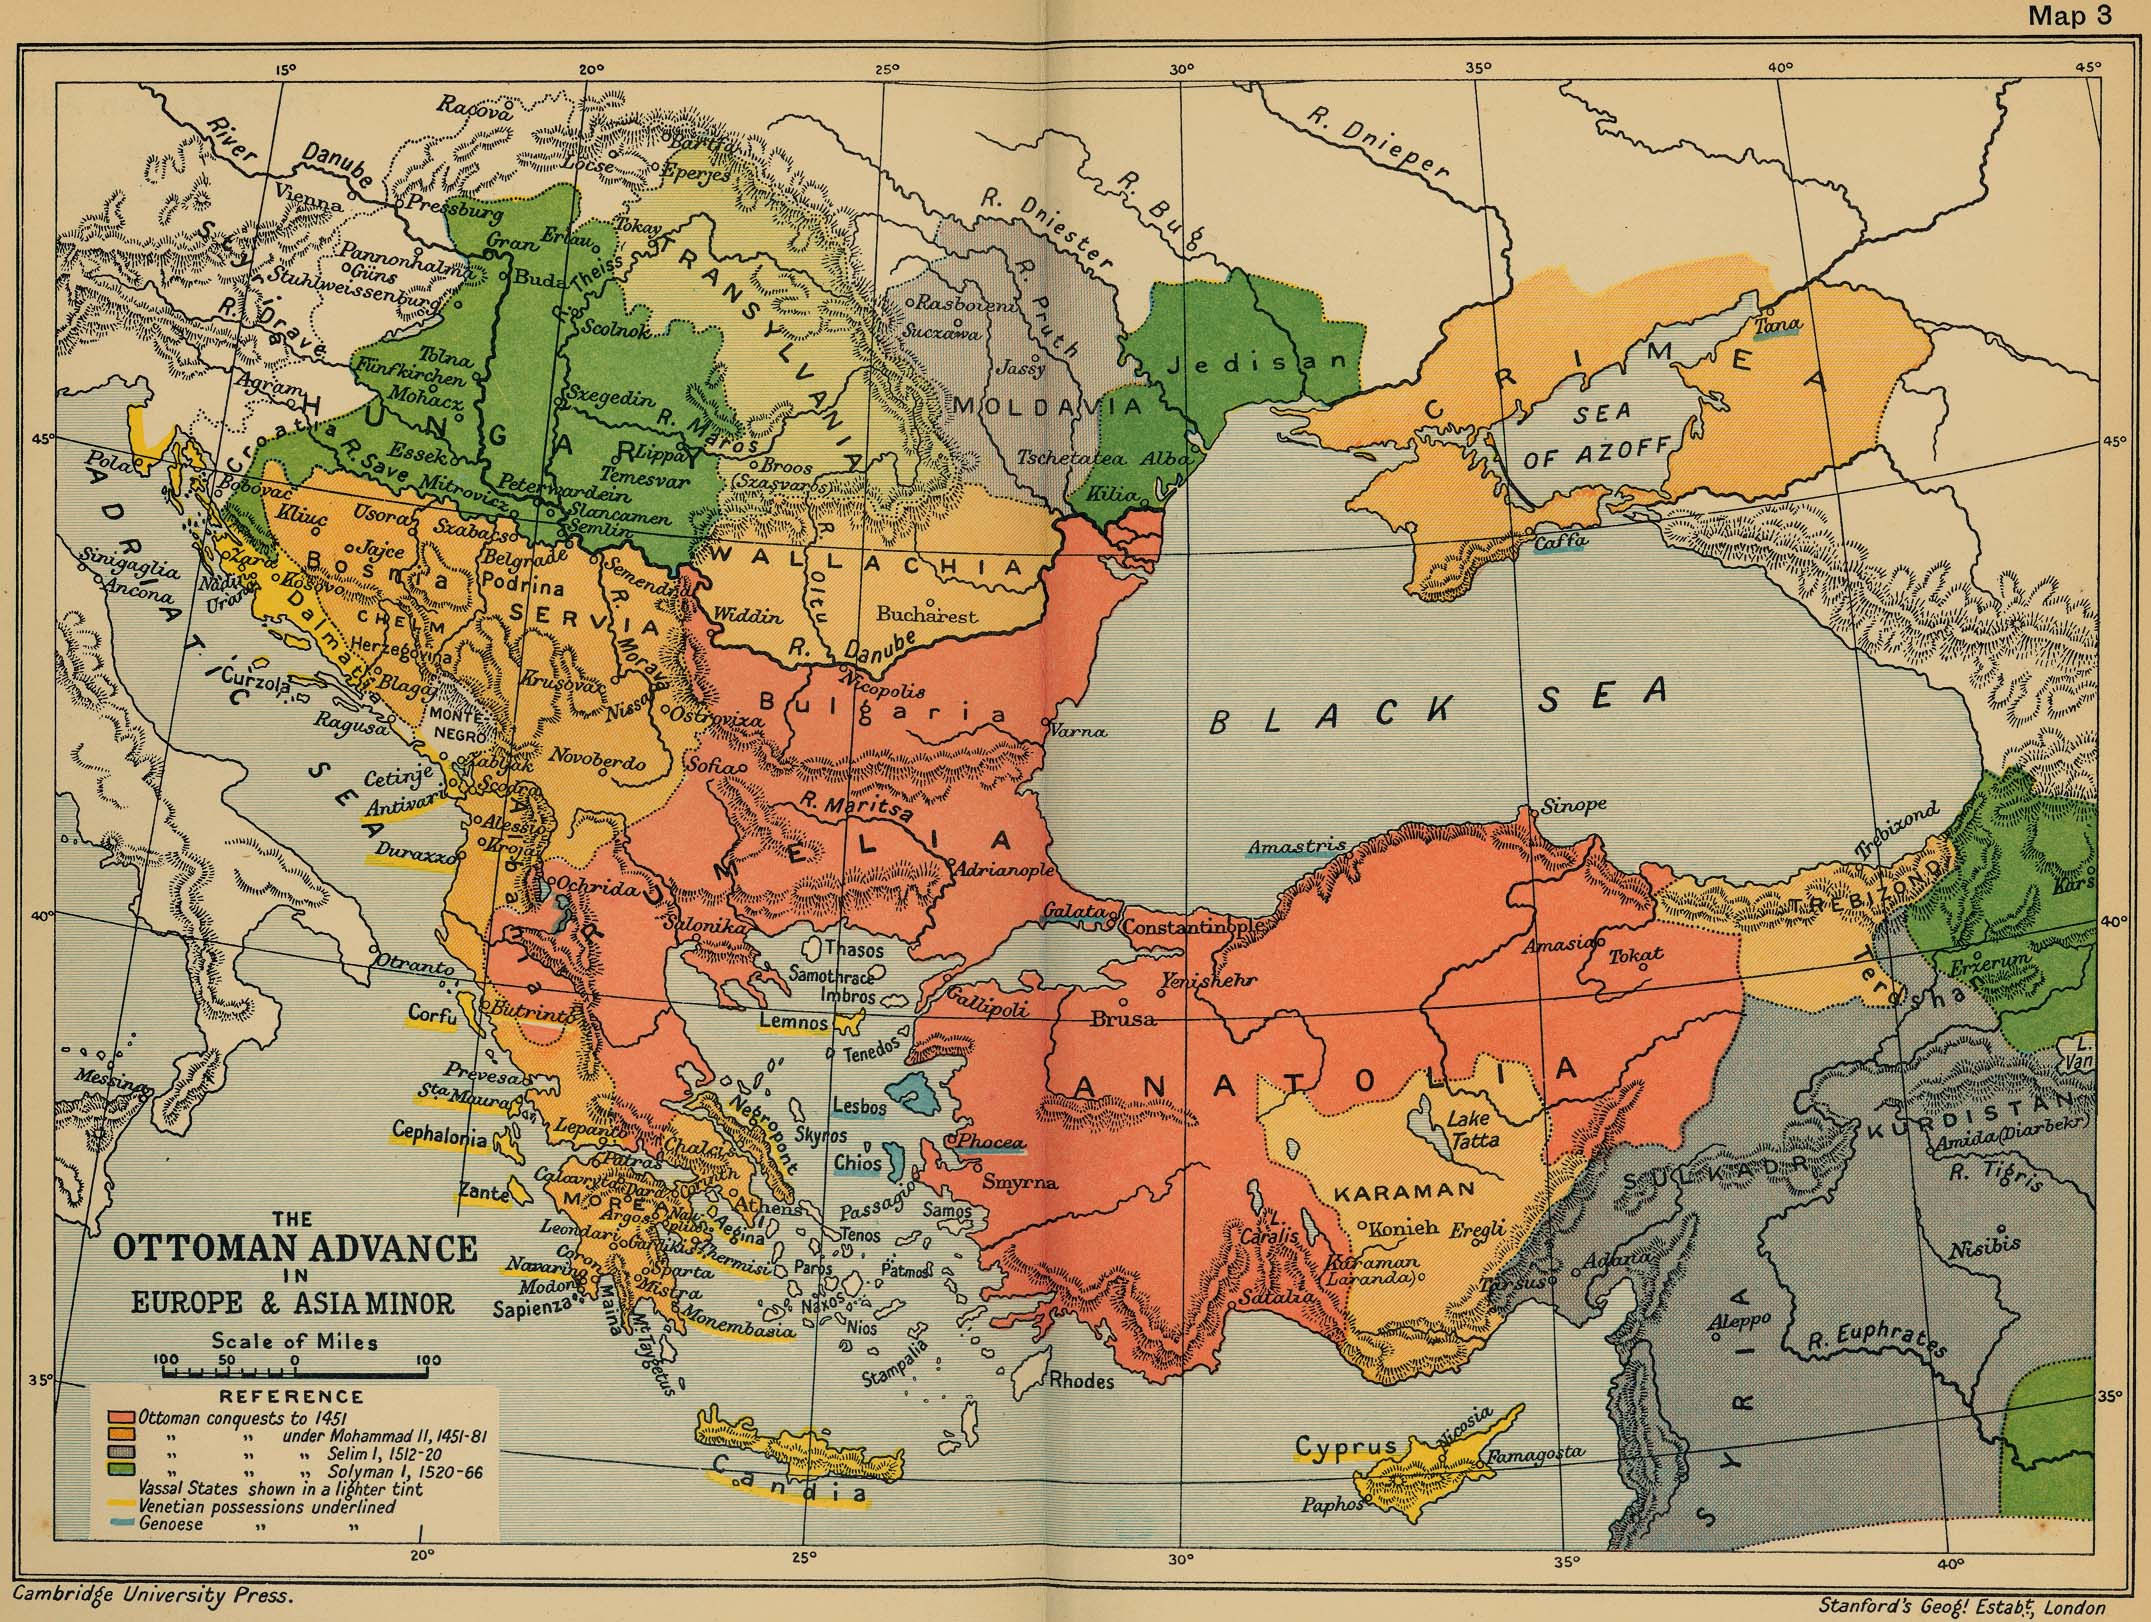 Map of the Ottoman Advance in Europe and Asia Minor